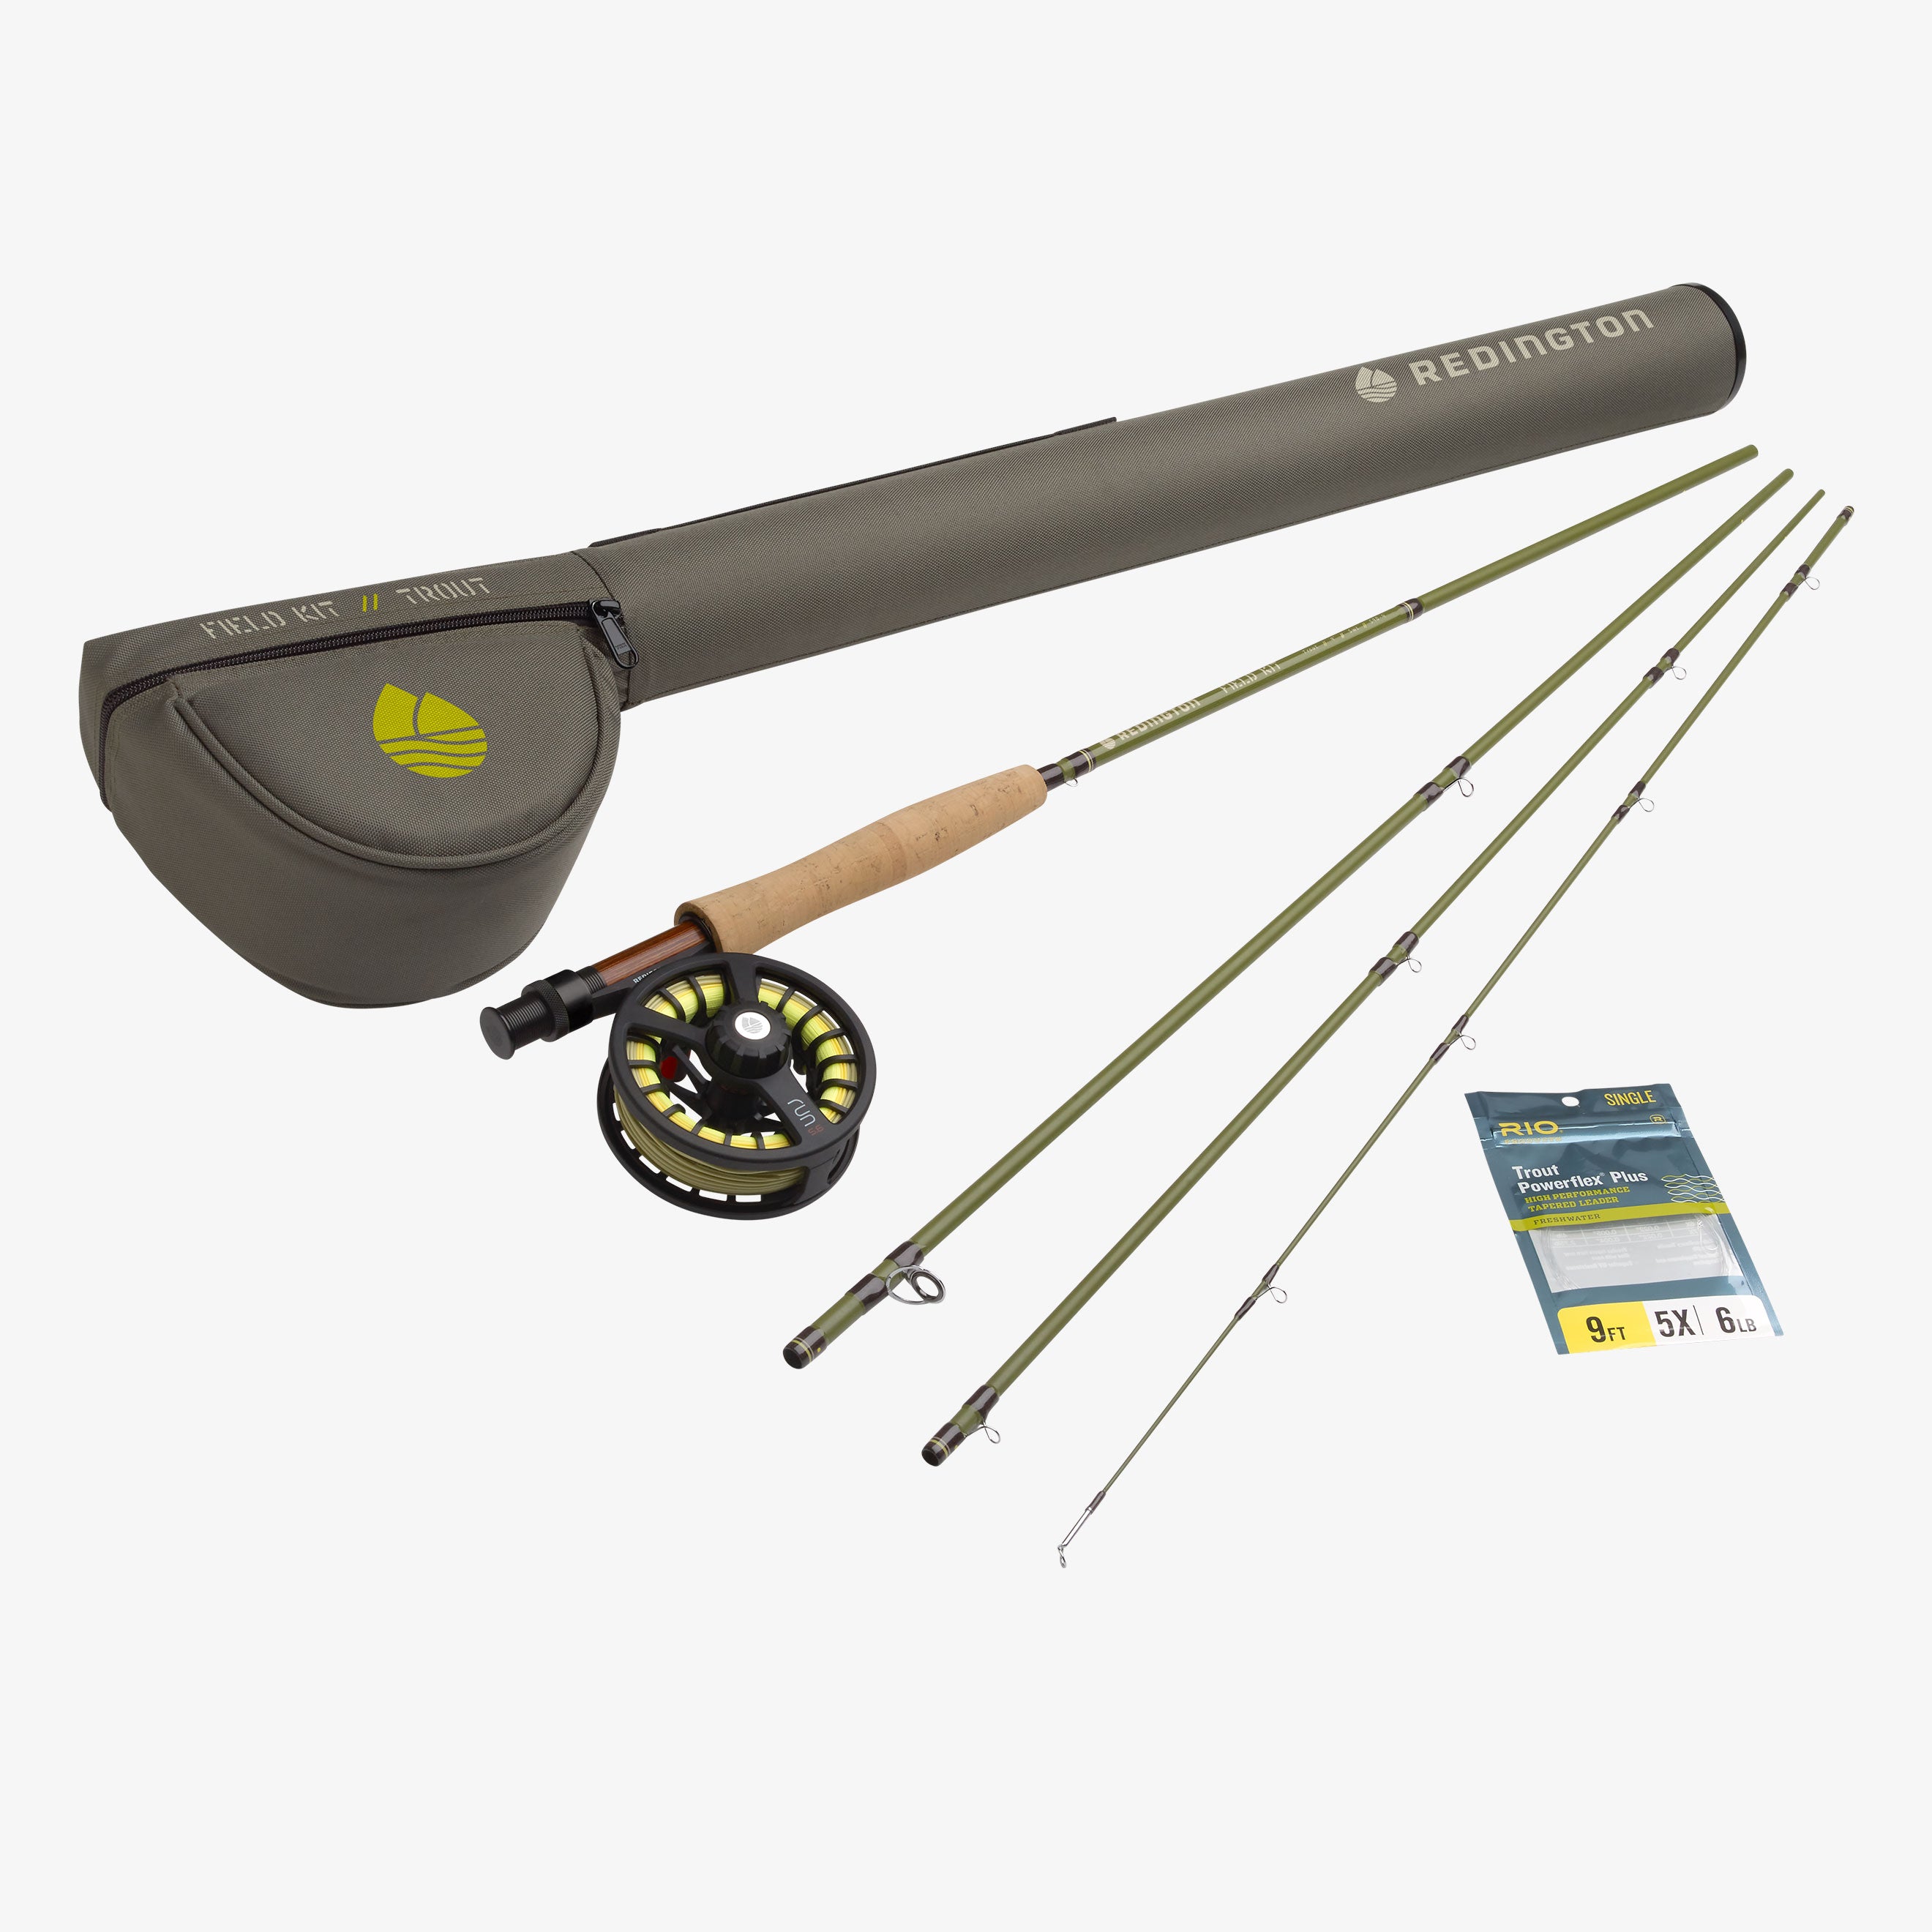 Starter Rod kits For Beginners  The North American Fly Fishing